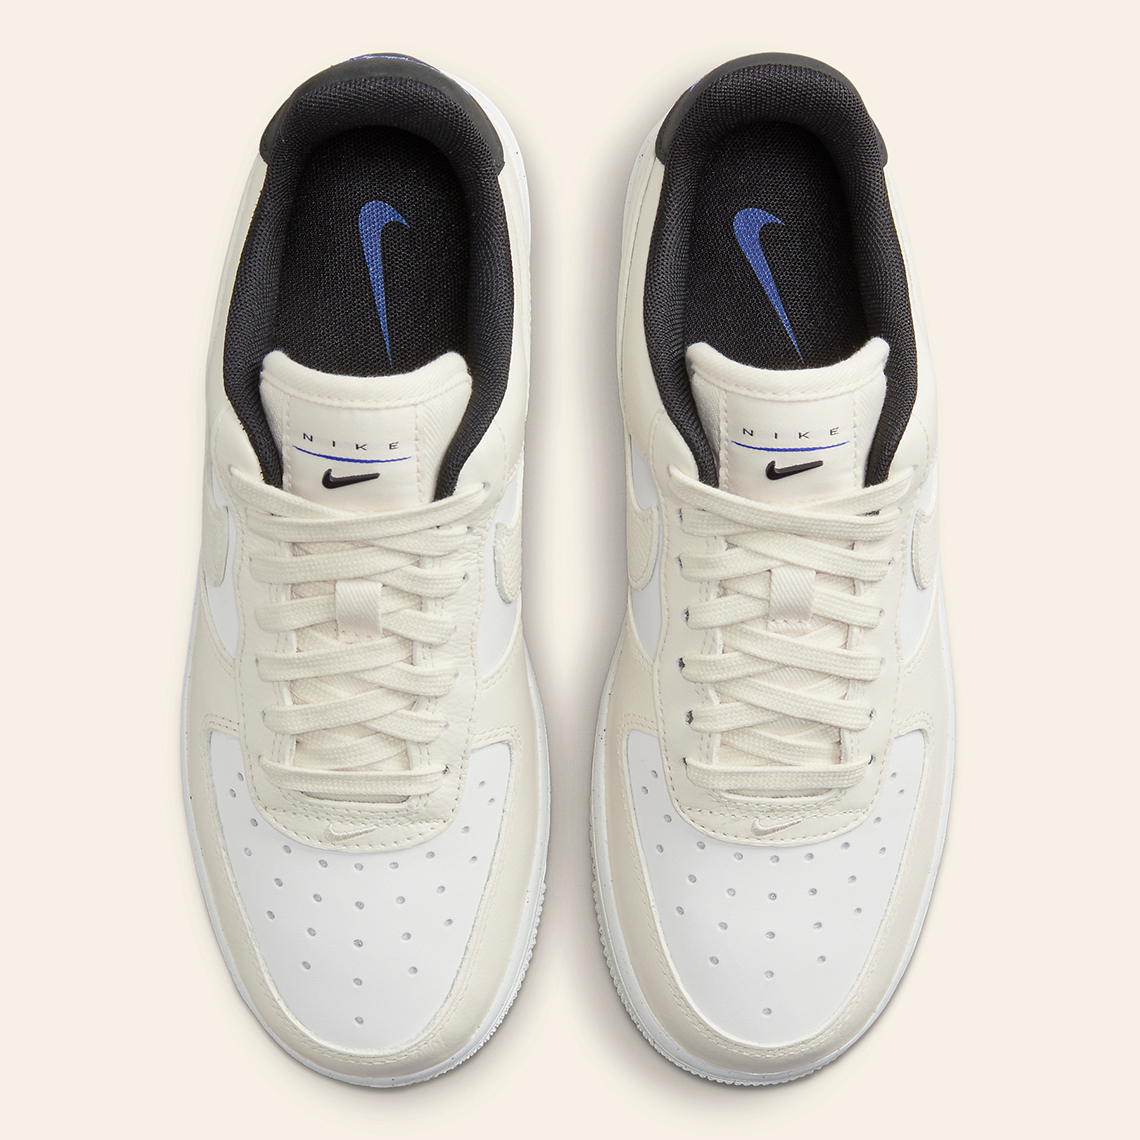 Official Images Of The Nike SB Dunk Low "Dodgers" Low Coconut Milk Black Dz2708 101 9